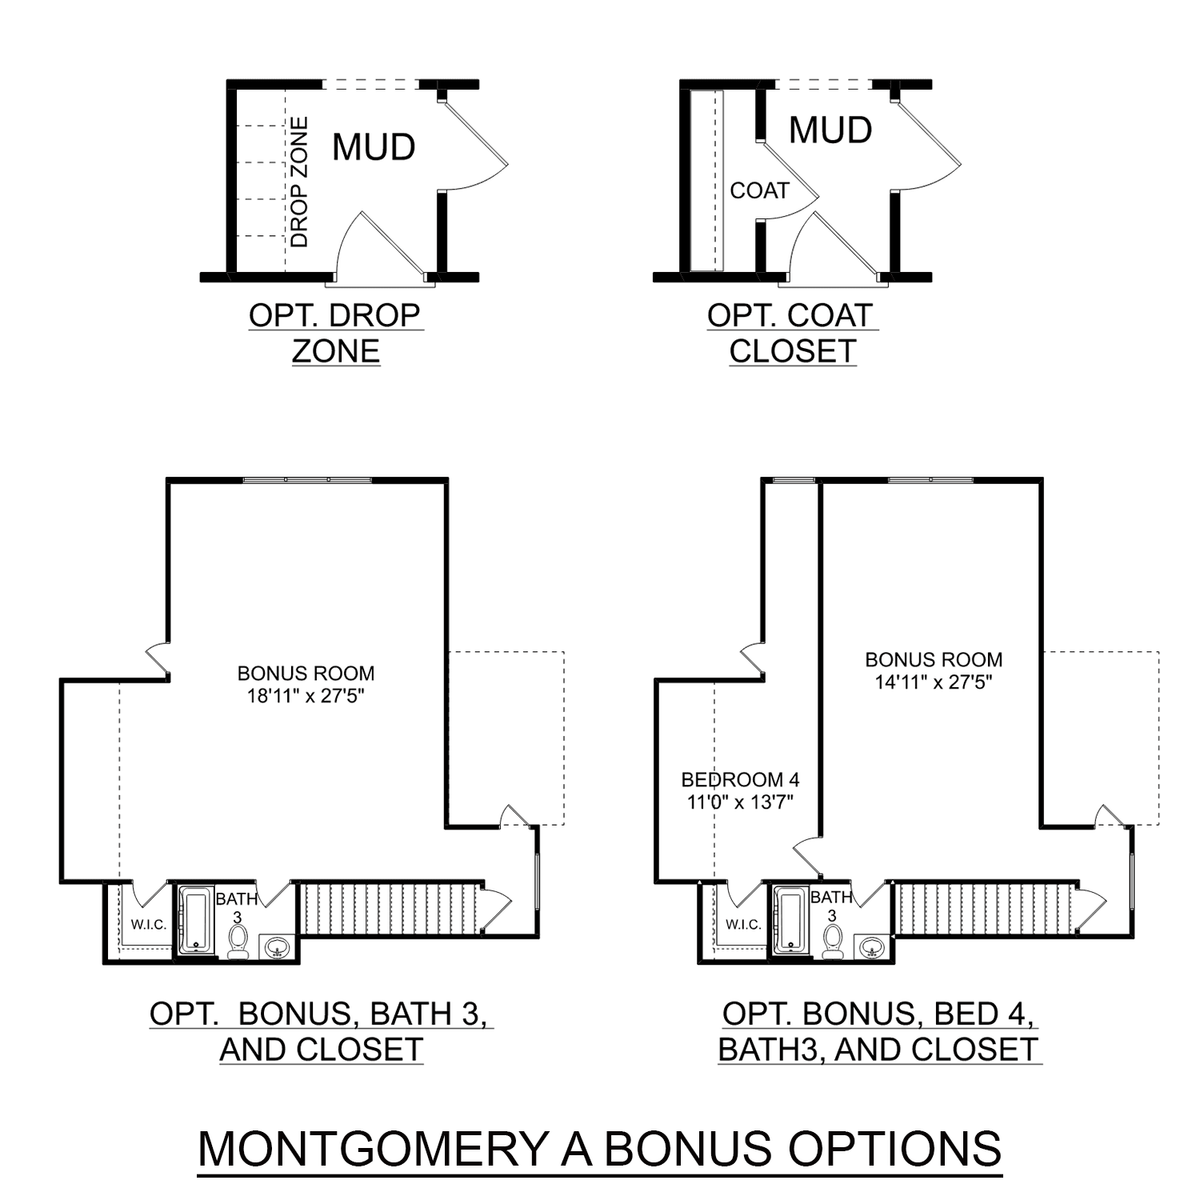 3 - The Montgomery with Bonus buildable floor plan layout in Davidson Homes' Kendall Downs community.